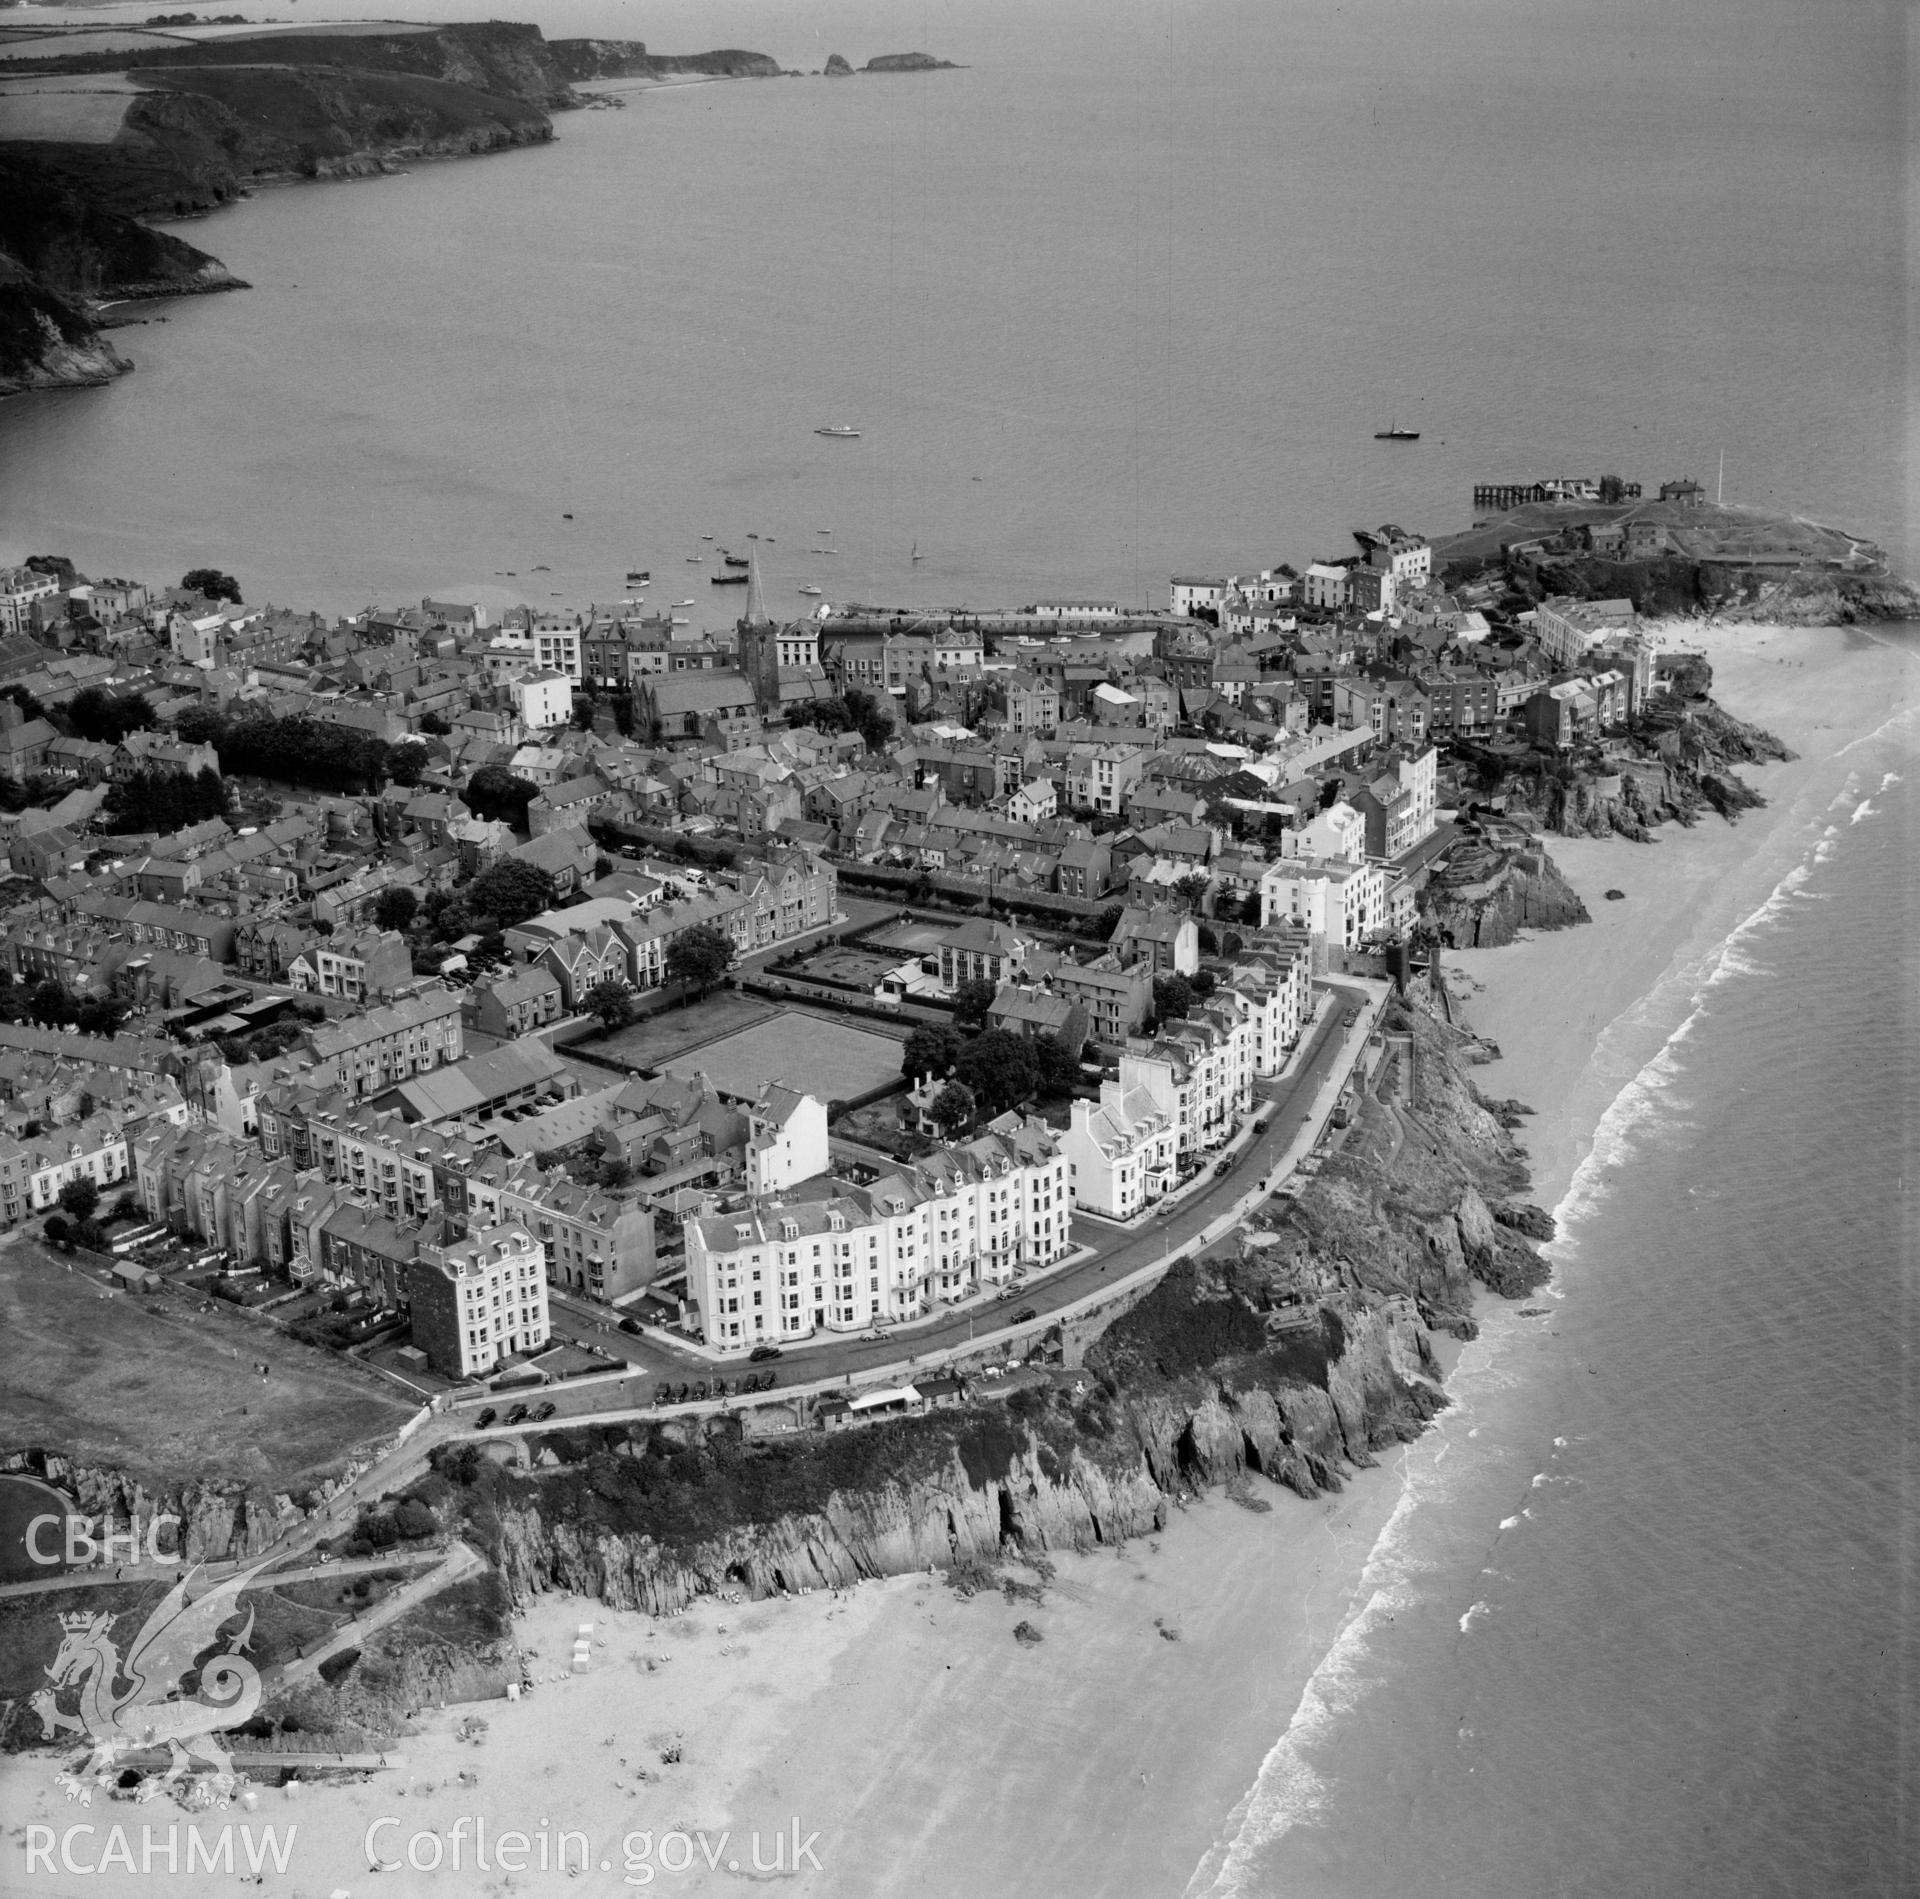 View of Tenby showing South Sands and Esplanade